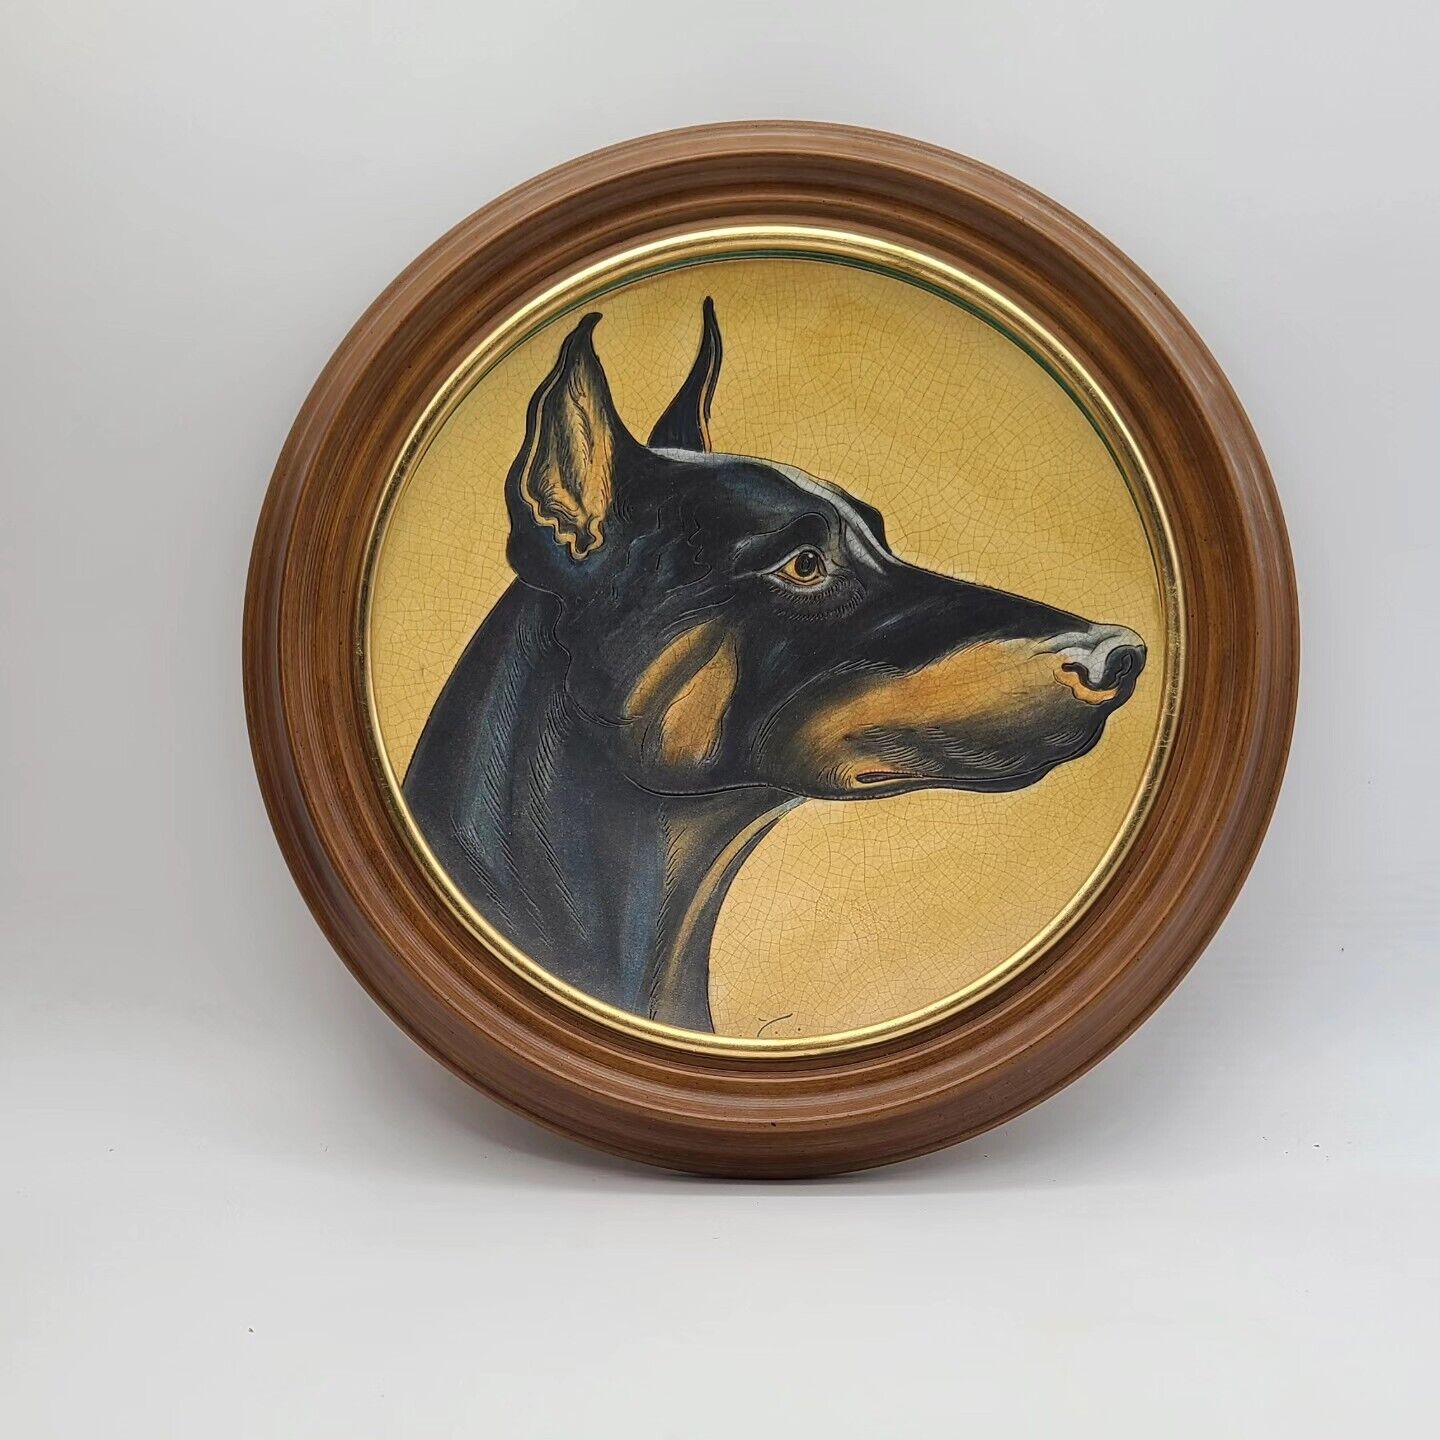 VINTAGE DOBERMAN PINSCHER PLATE BY VENETO FLAIR 1974 LE BY V. TIZIANO ITALY